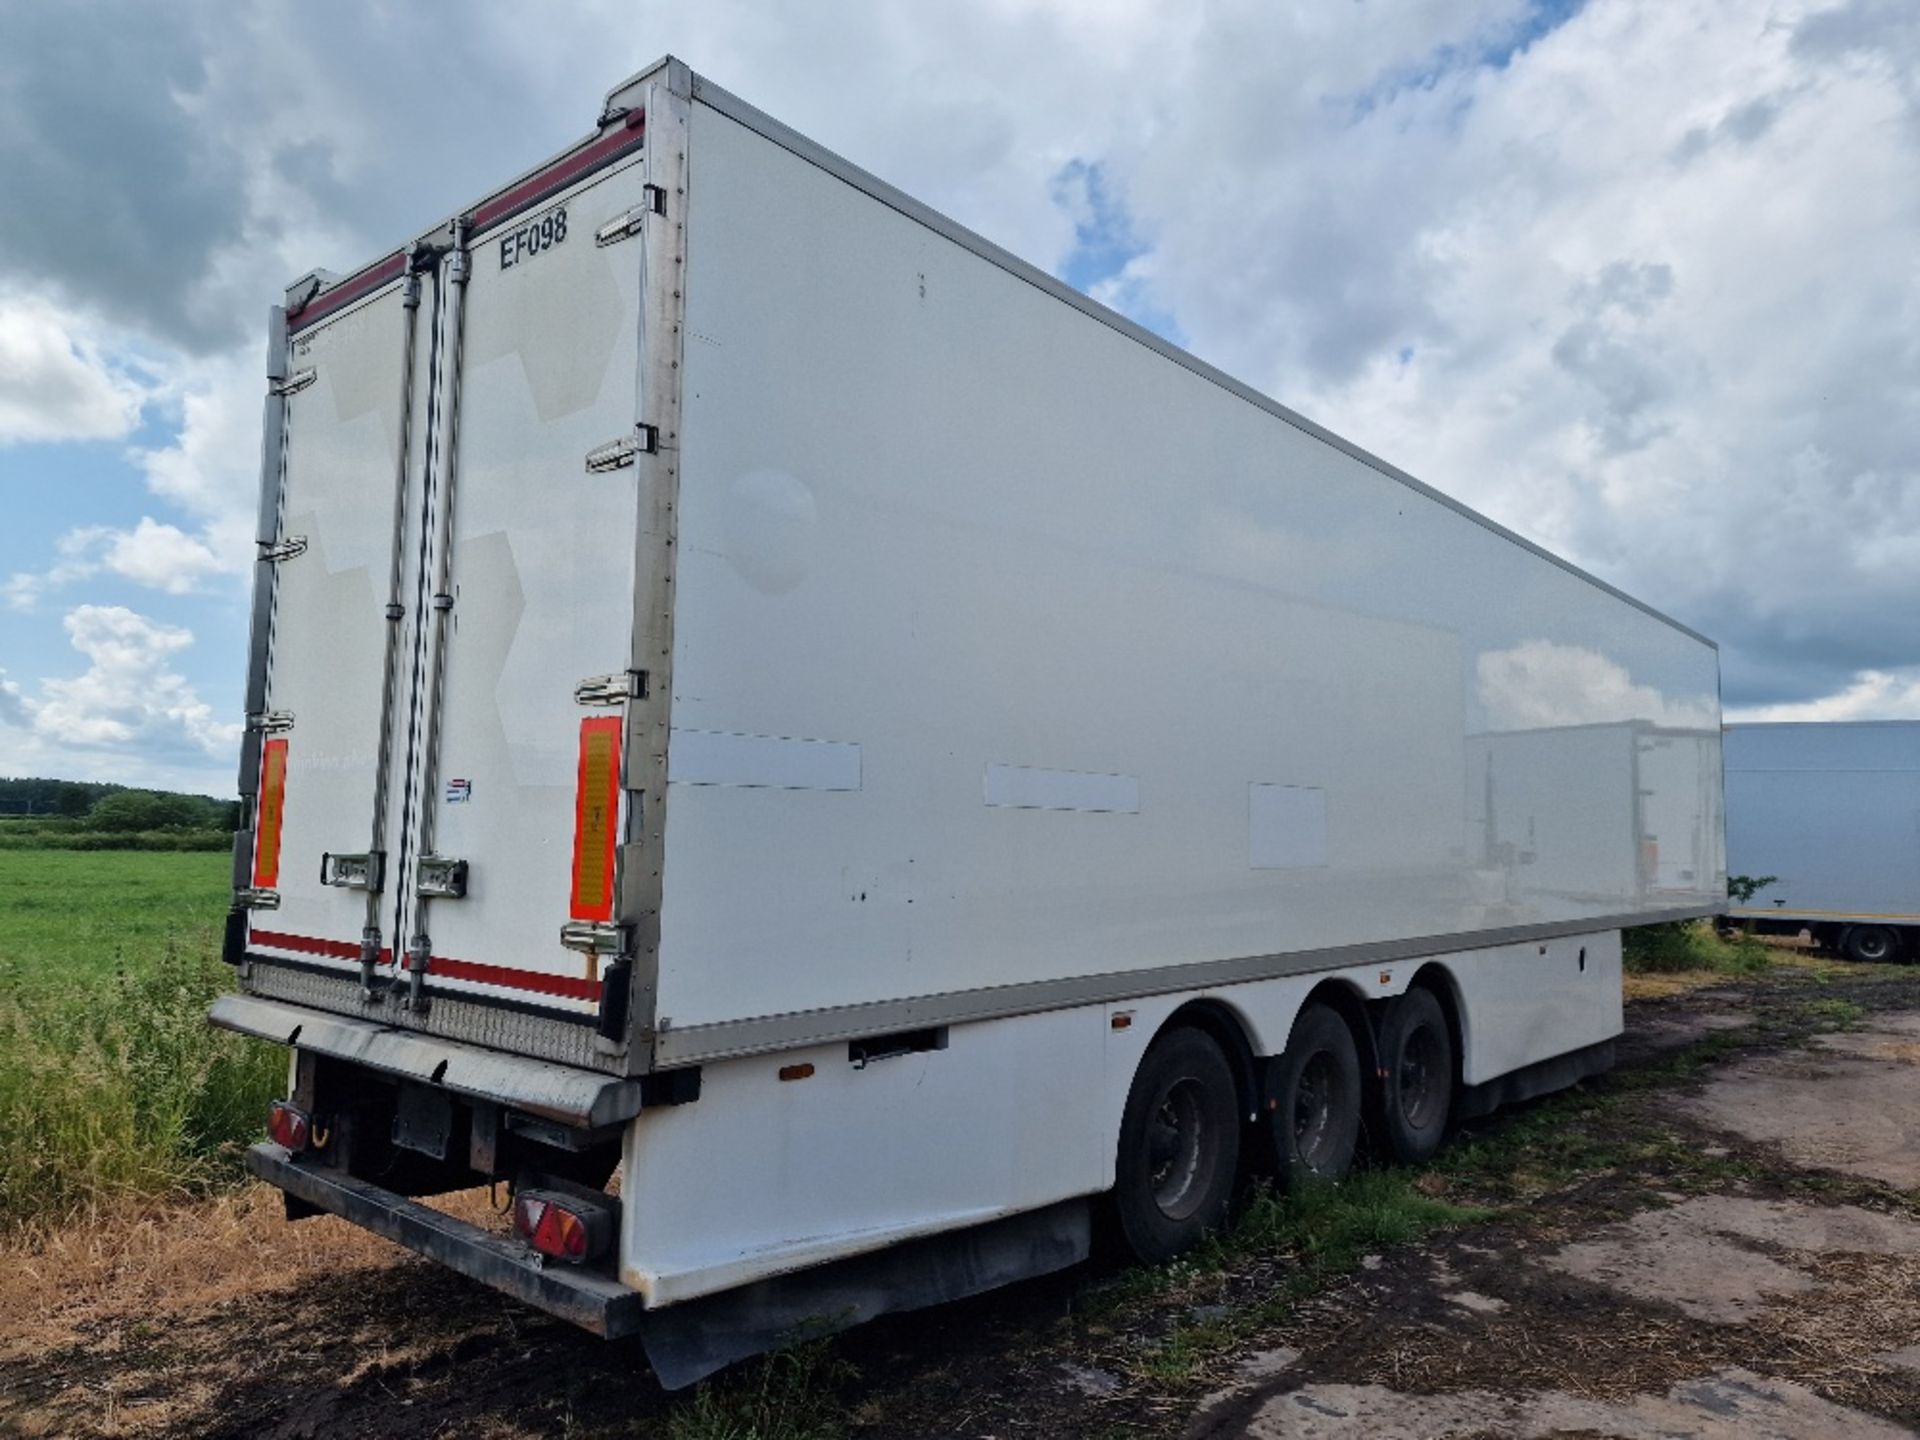 EF098 - 2010 Montracon 13.6m Tri-Axle Refrigerated Trailer - Image 9 of 19